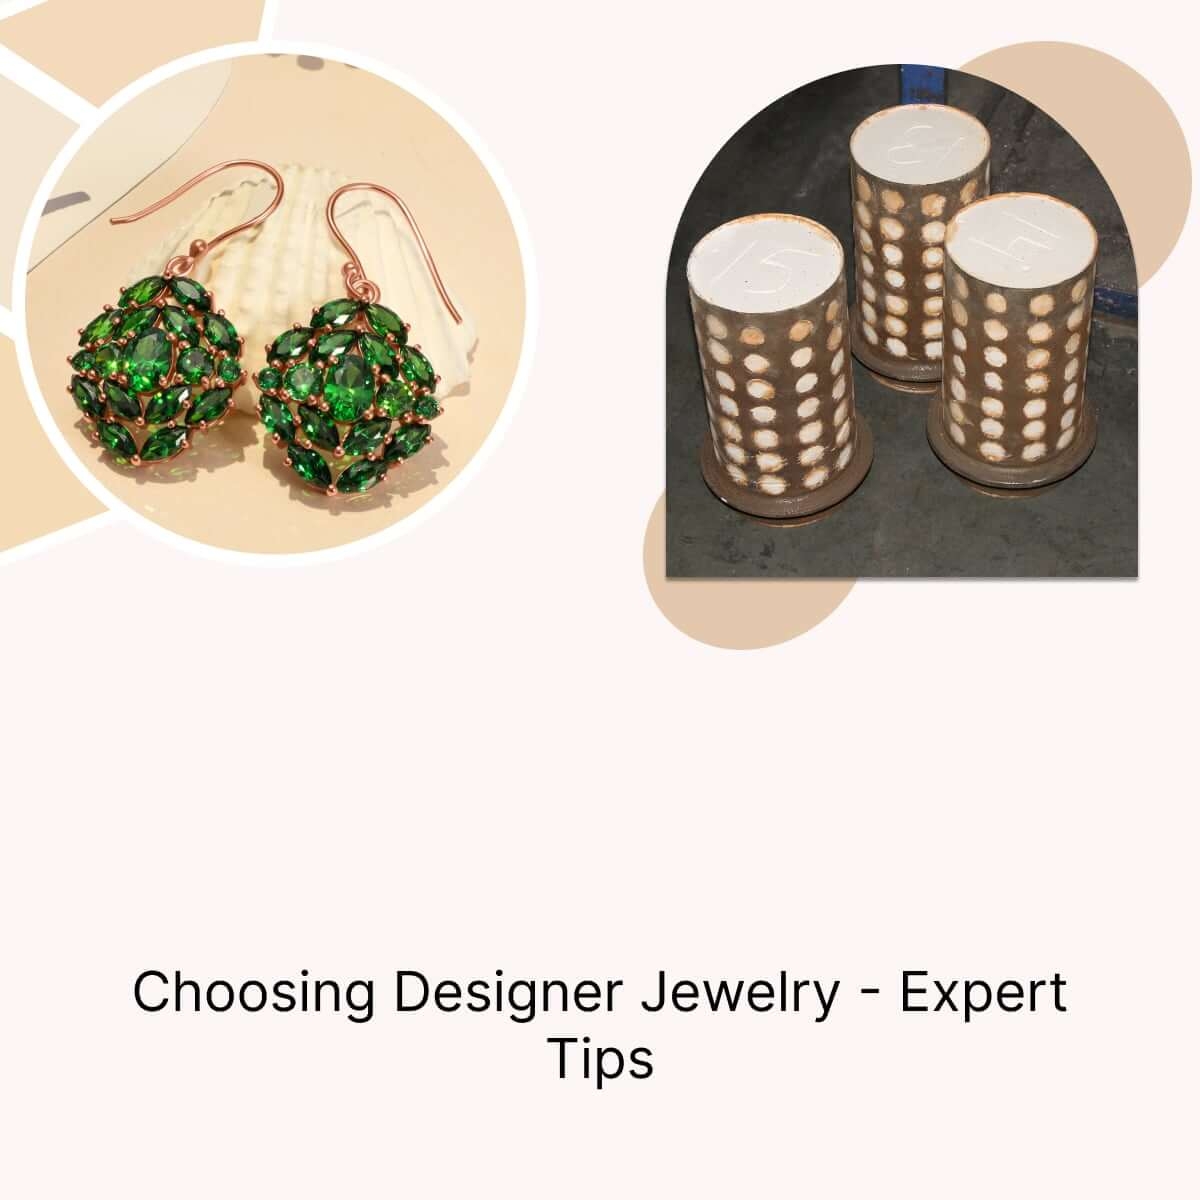 Tips for Selecting Designer Jewelry